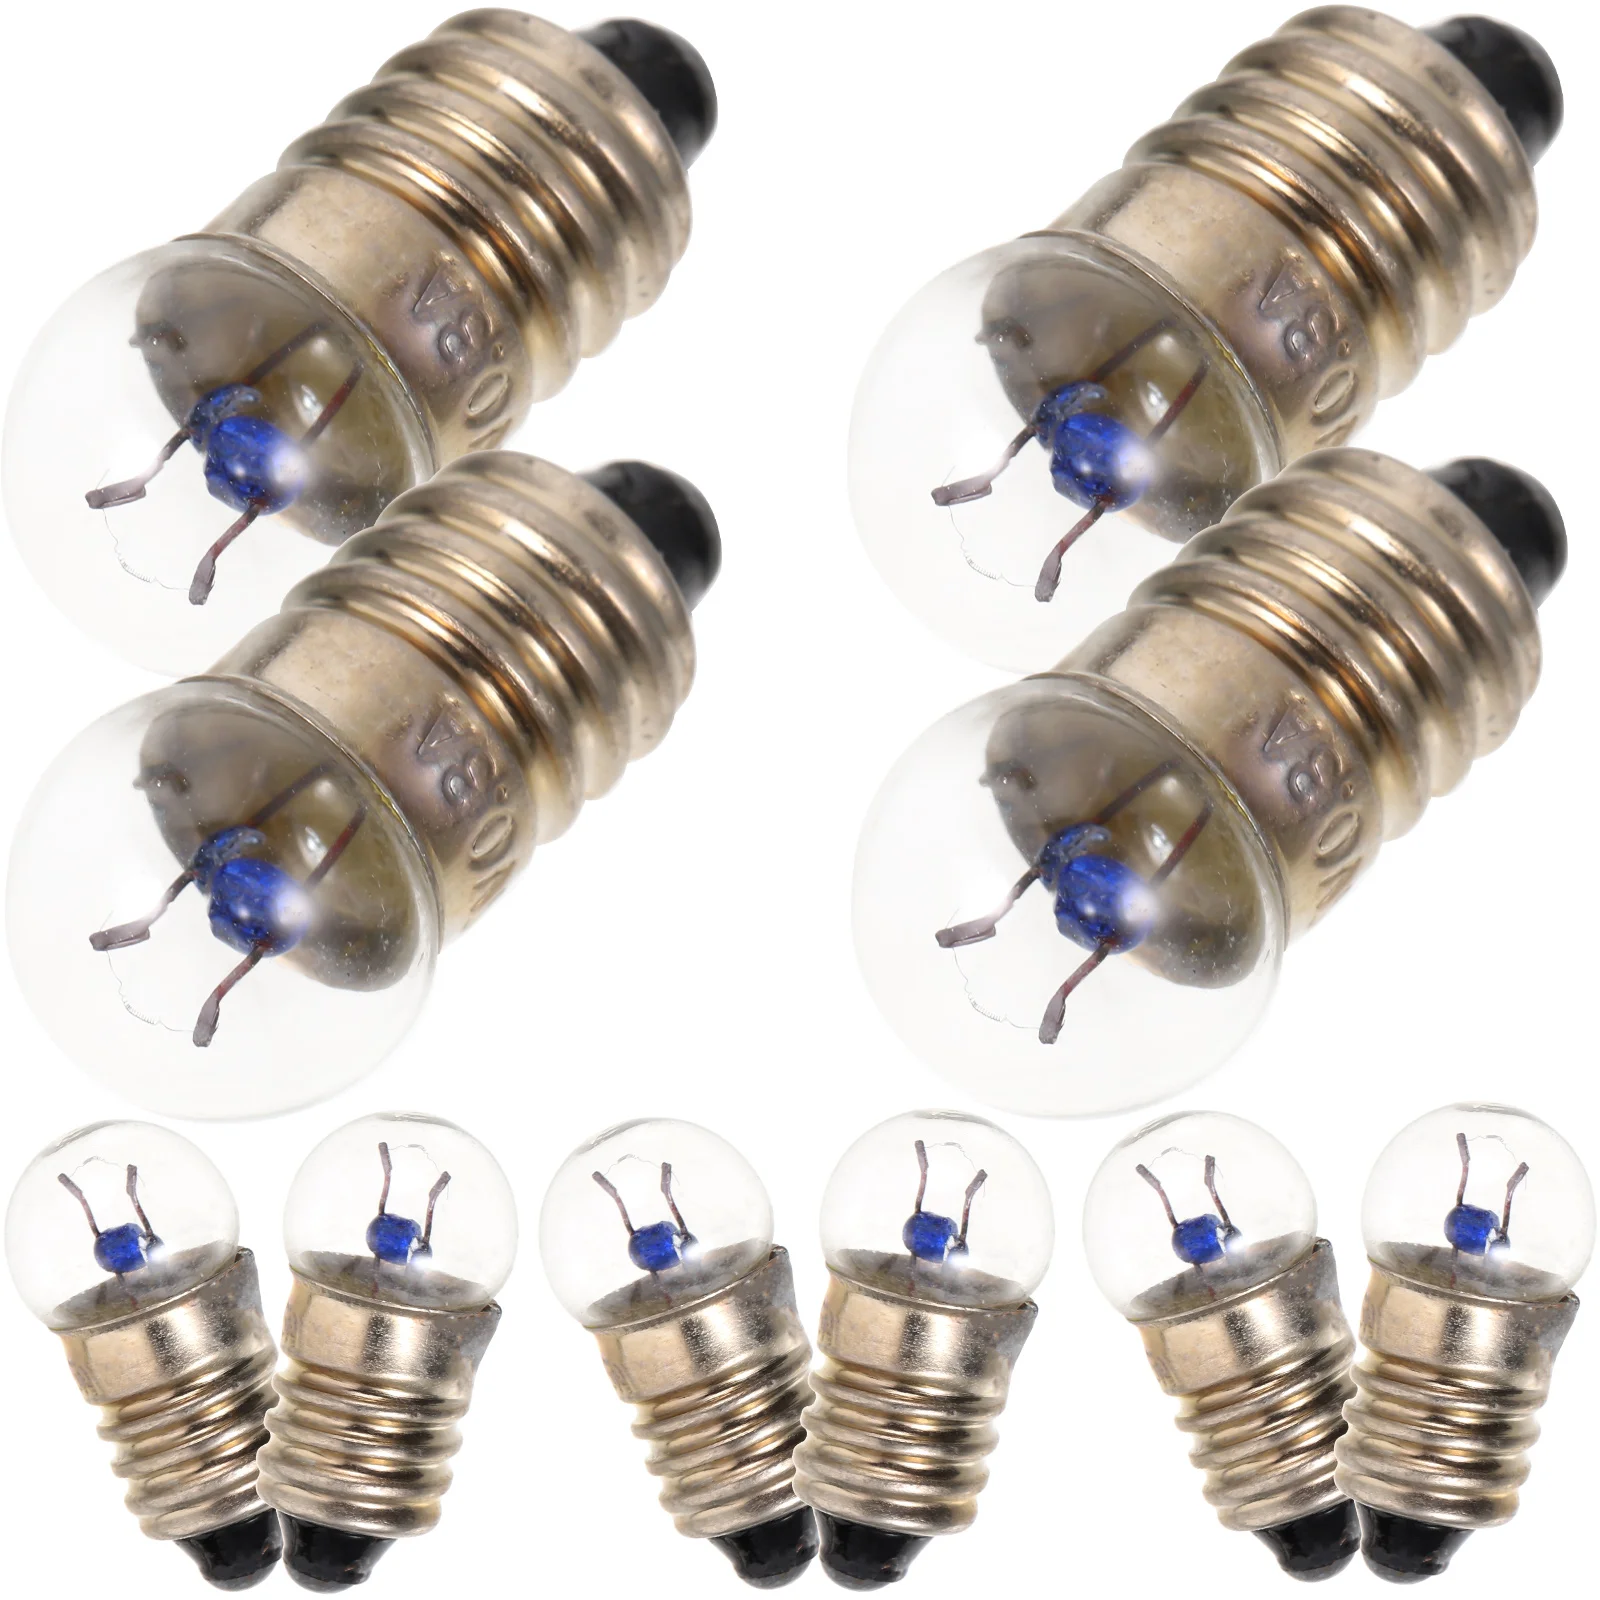 

10pcs E10 Small Light Bulb: 2 5V 0 3A Miniature Screw Base Electric Bead for Home Experiment Circuit Electrical Test